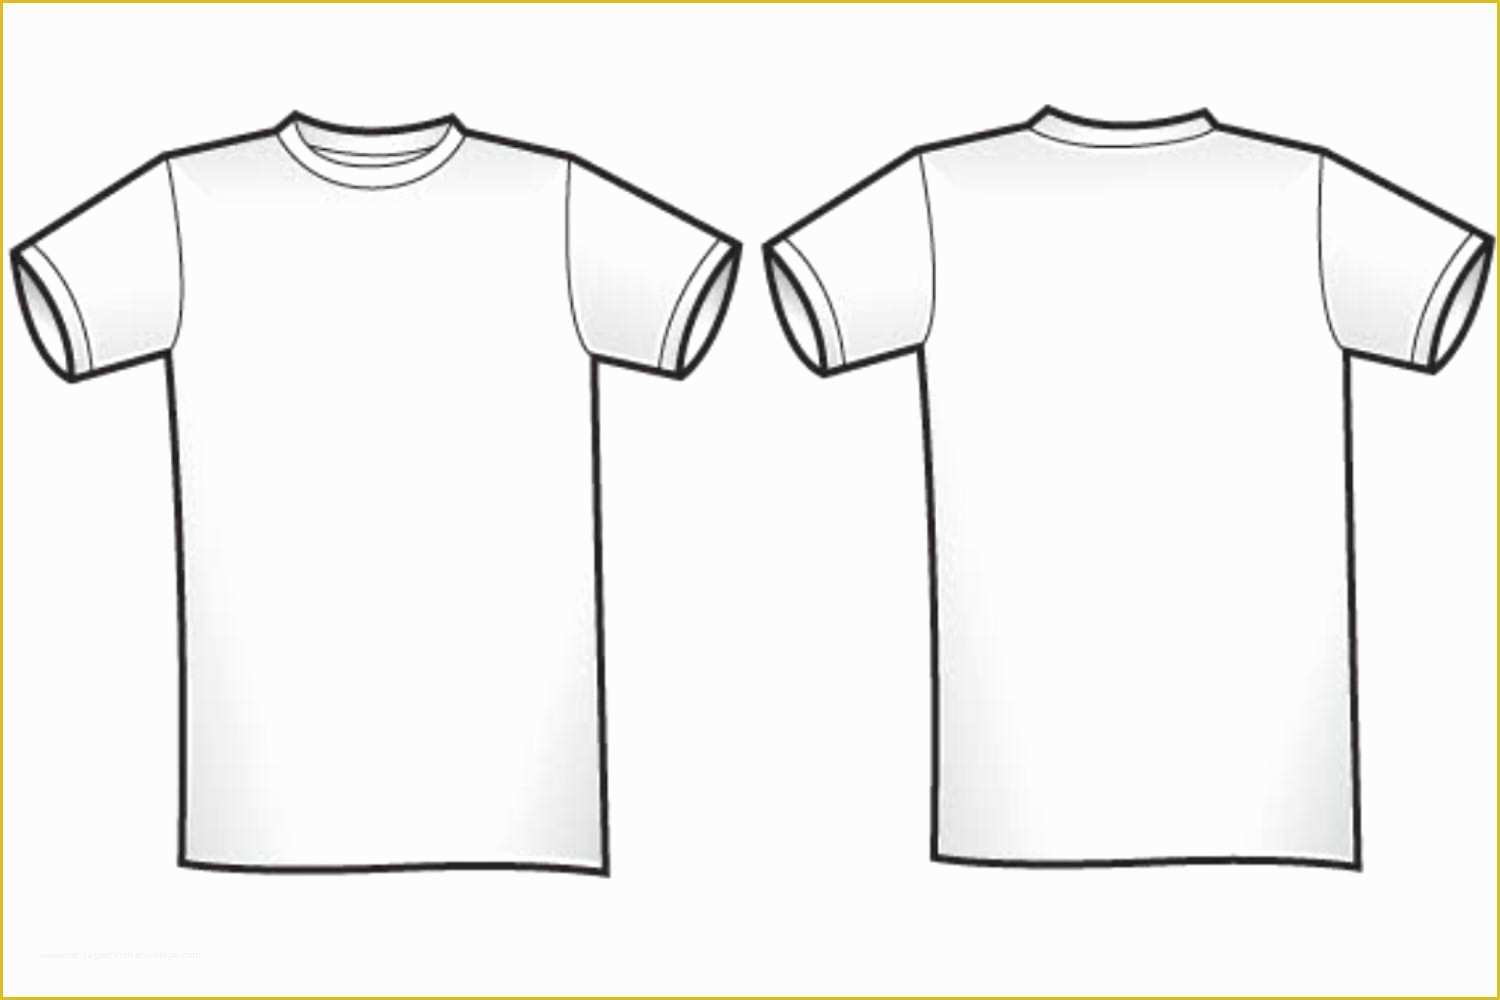 T Shirt Design Template Free Download Of Printable Designs for T Shirts ...